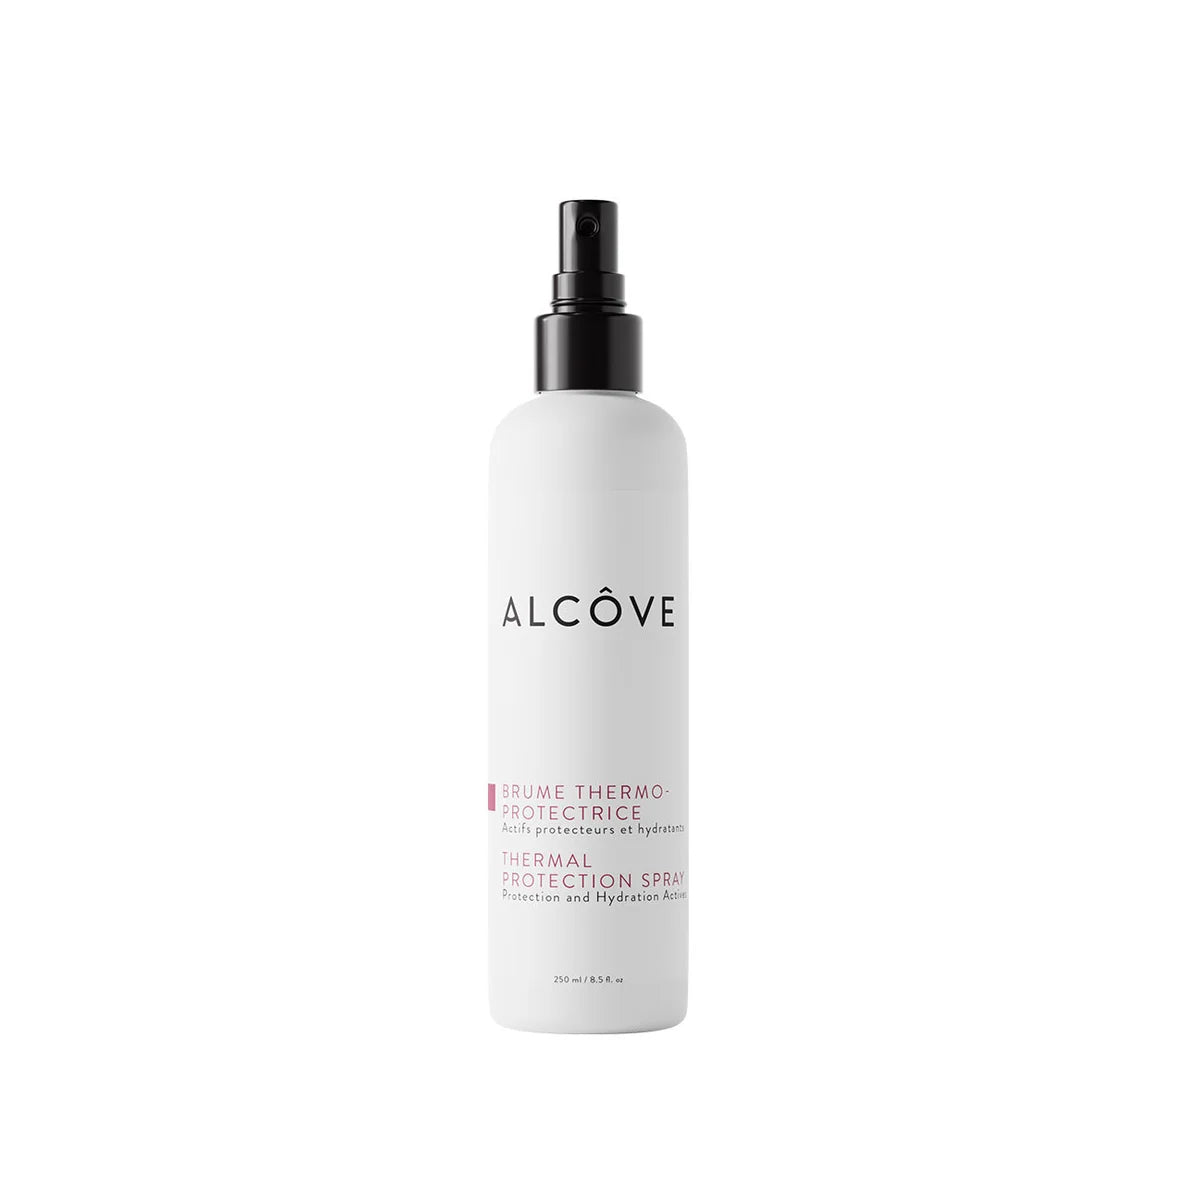 Alcove Thermal Protection Spray